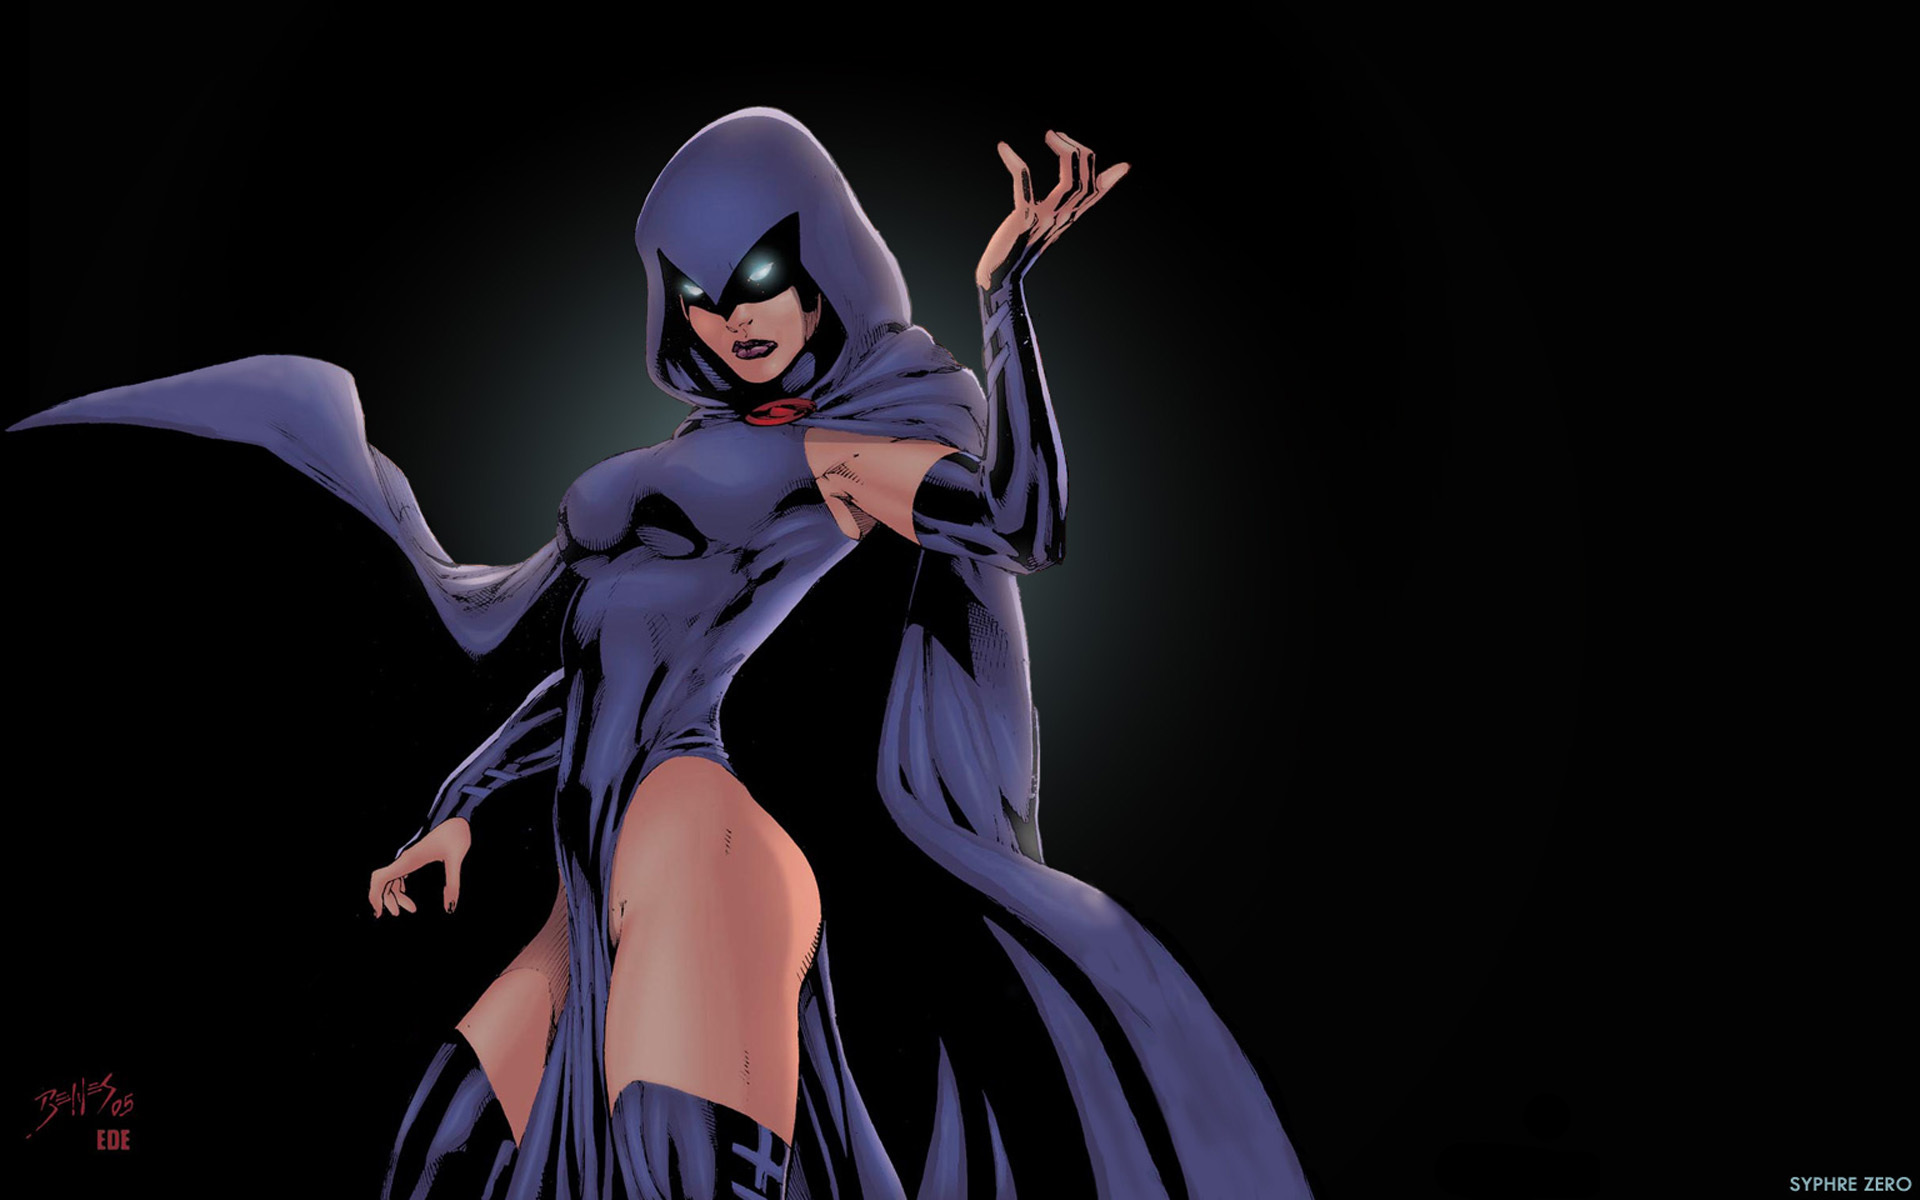  Fatales images Raven Widescreen HD wallpaper and background photos 1920x1200